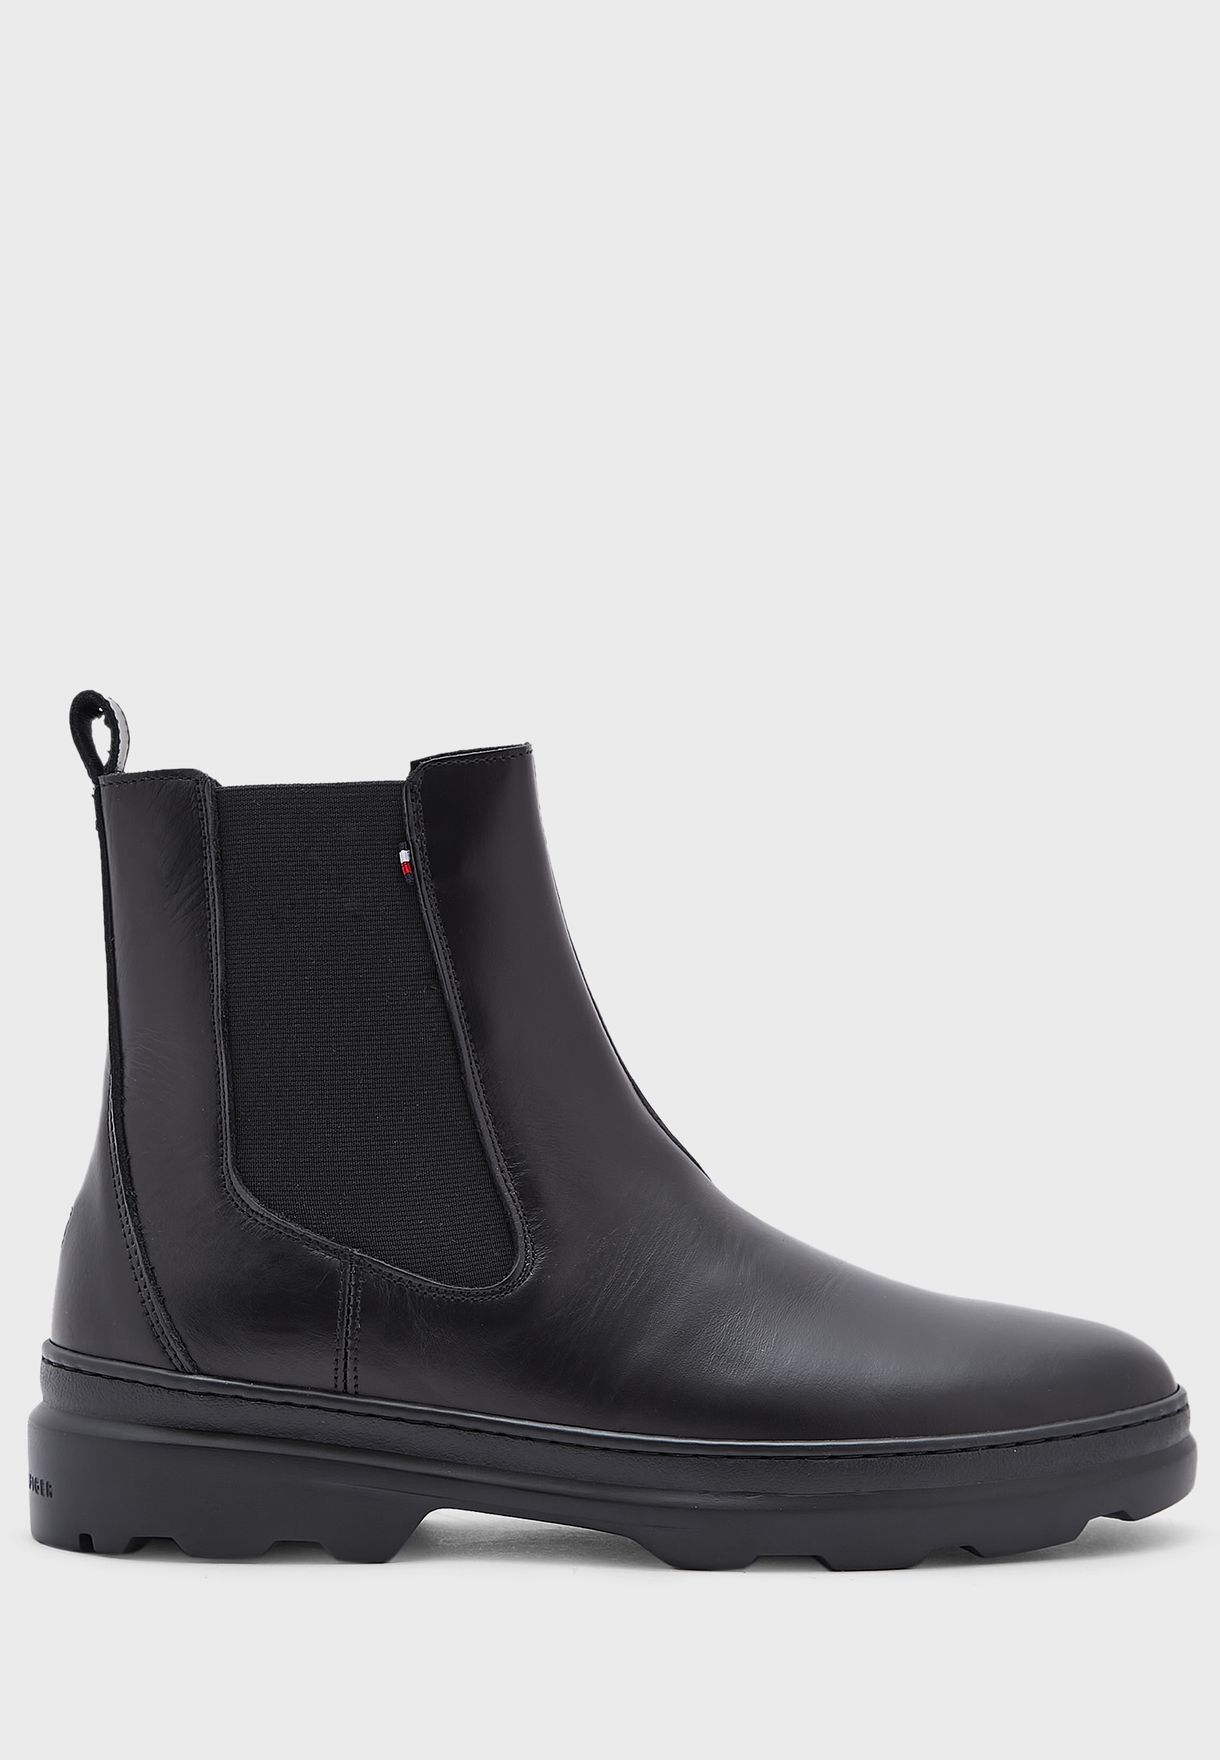 Essential Casual Boots